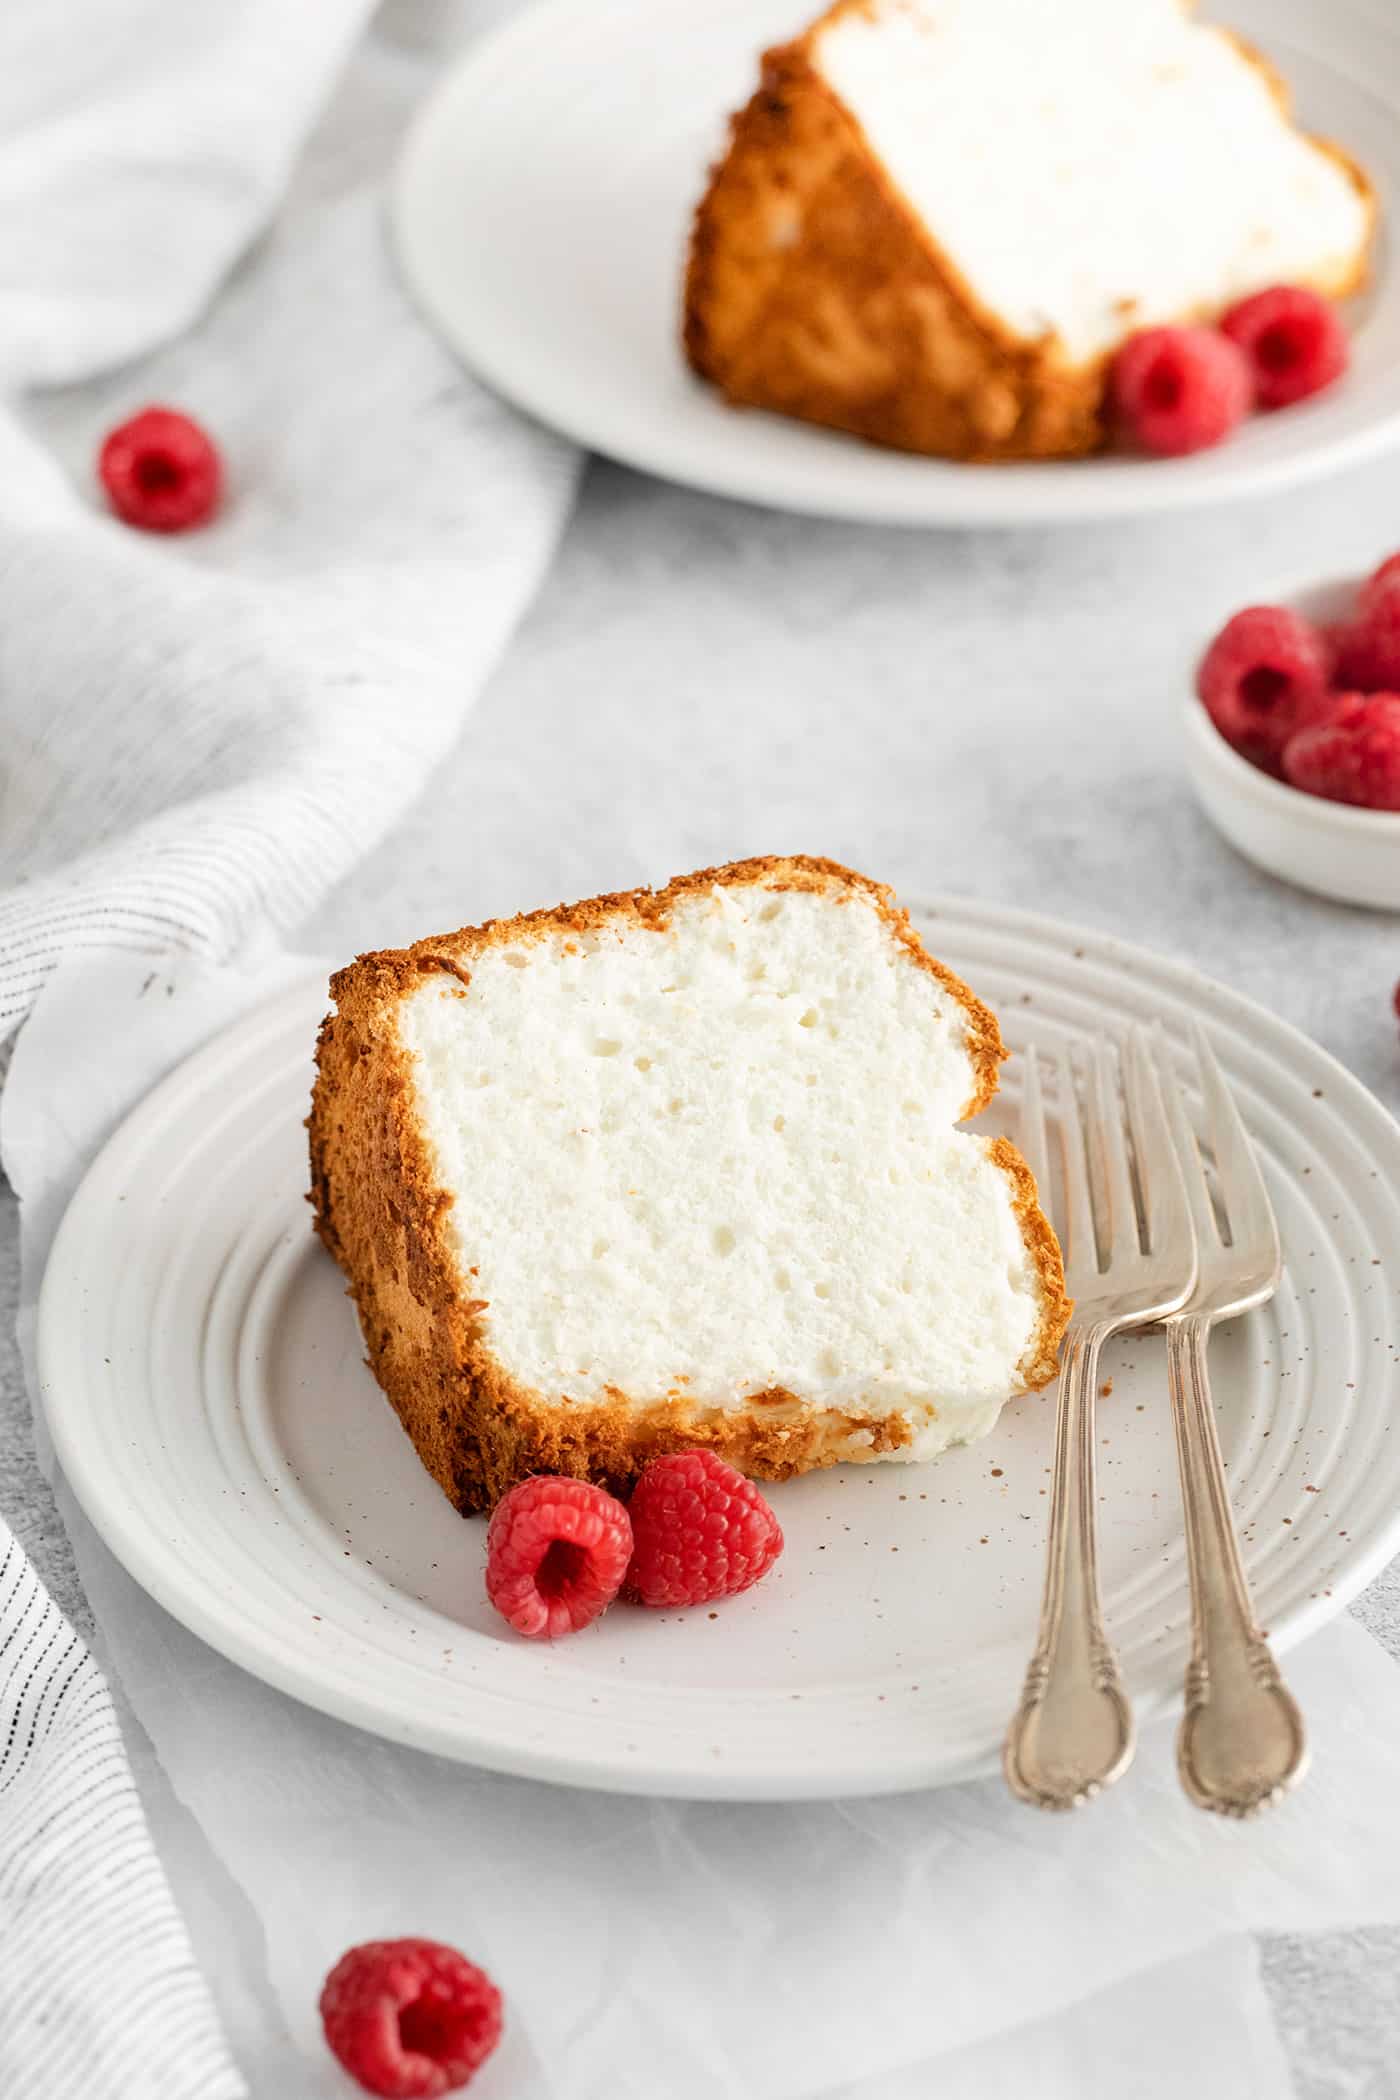 Overhead view of a slice of angel food cake